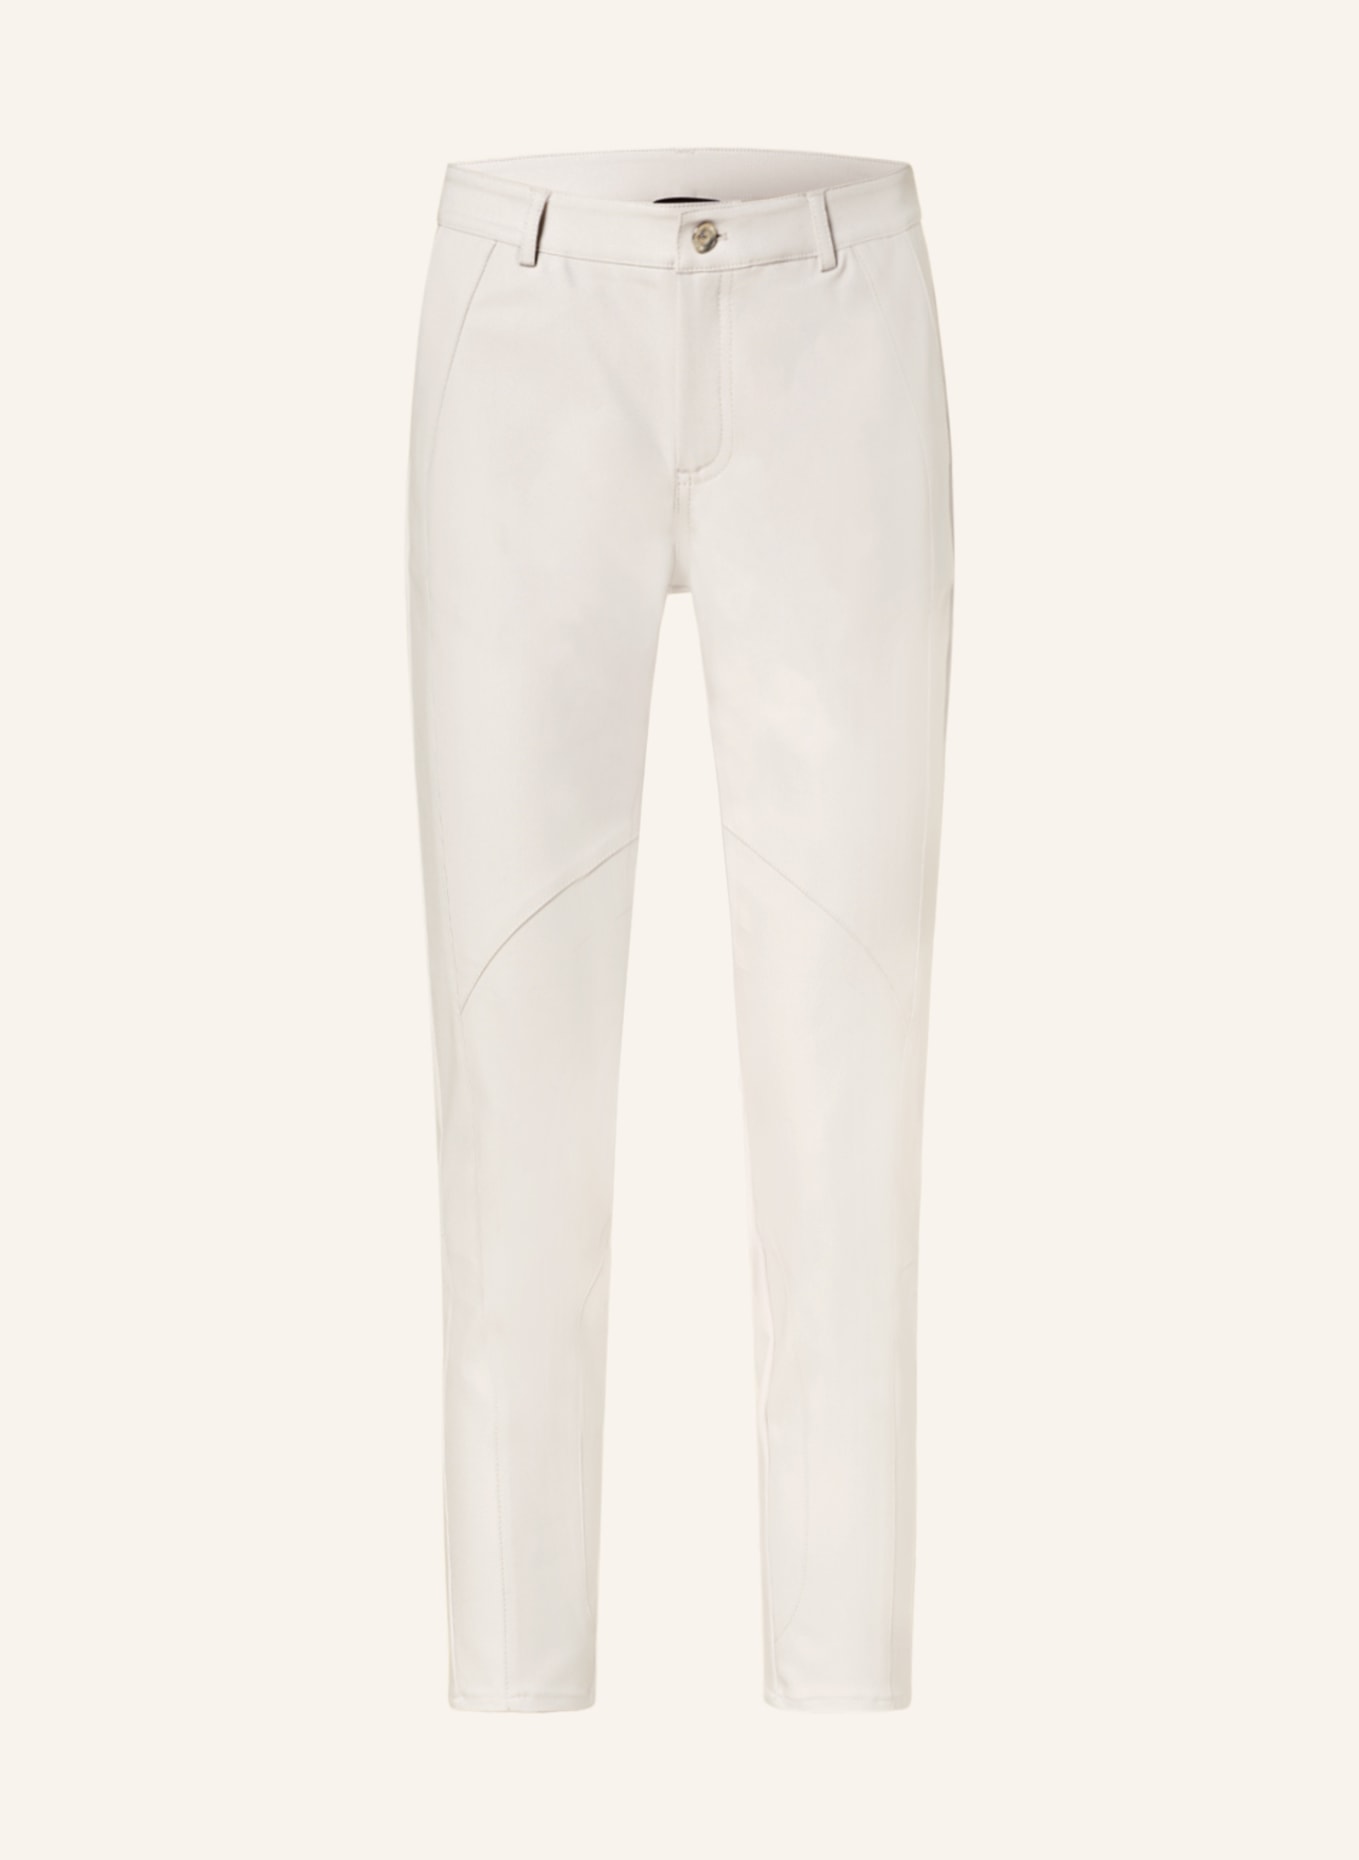 monari 7/8 trousers made of jersey, Color: CREAM (Image 1)